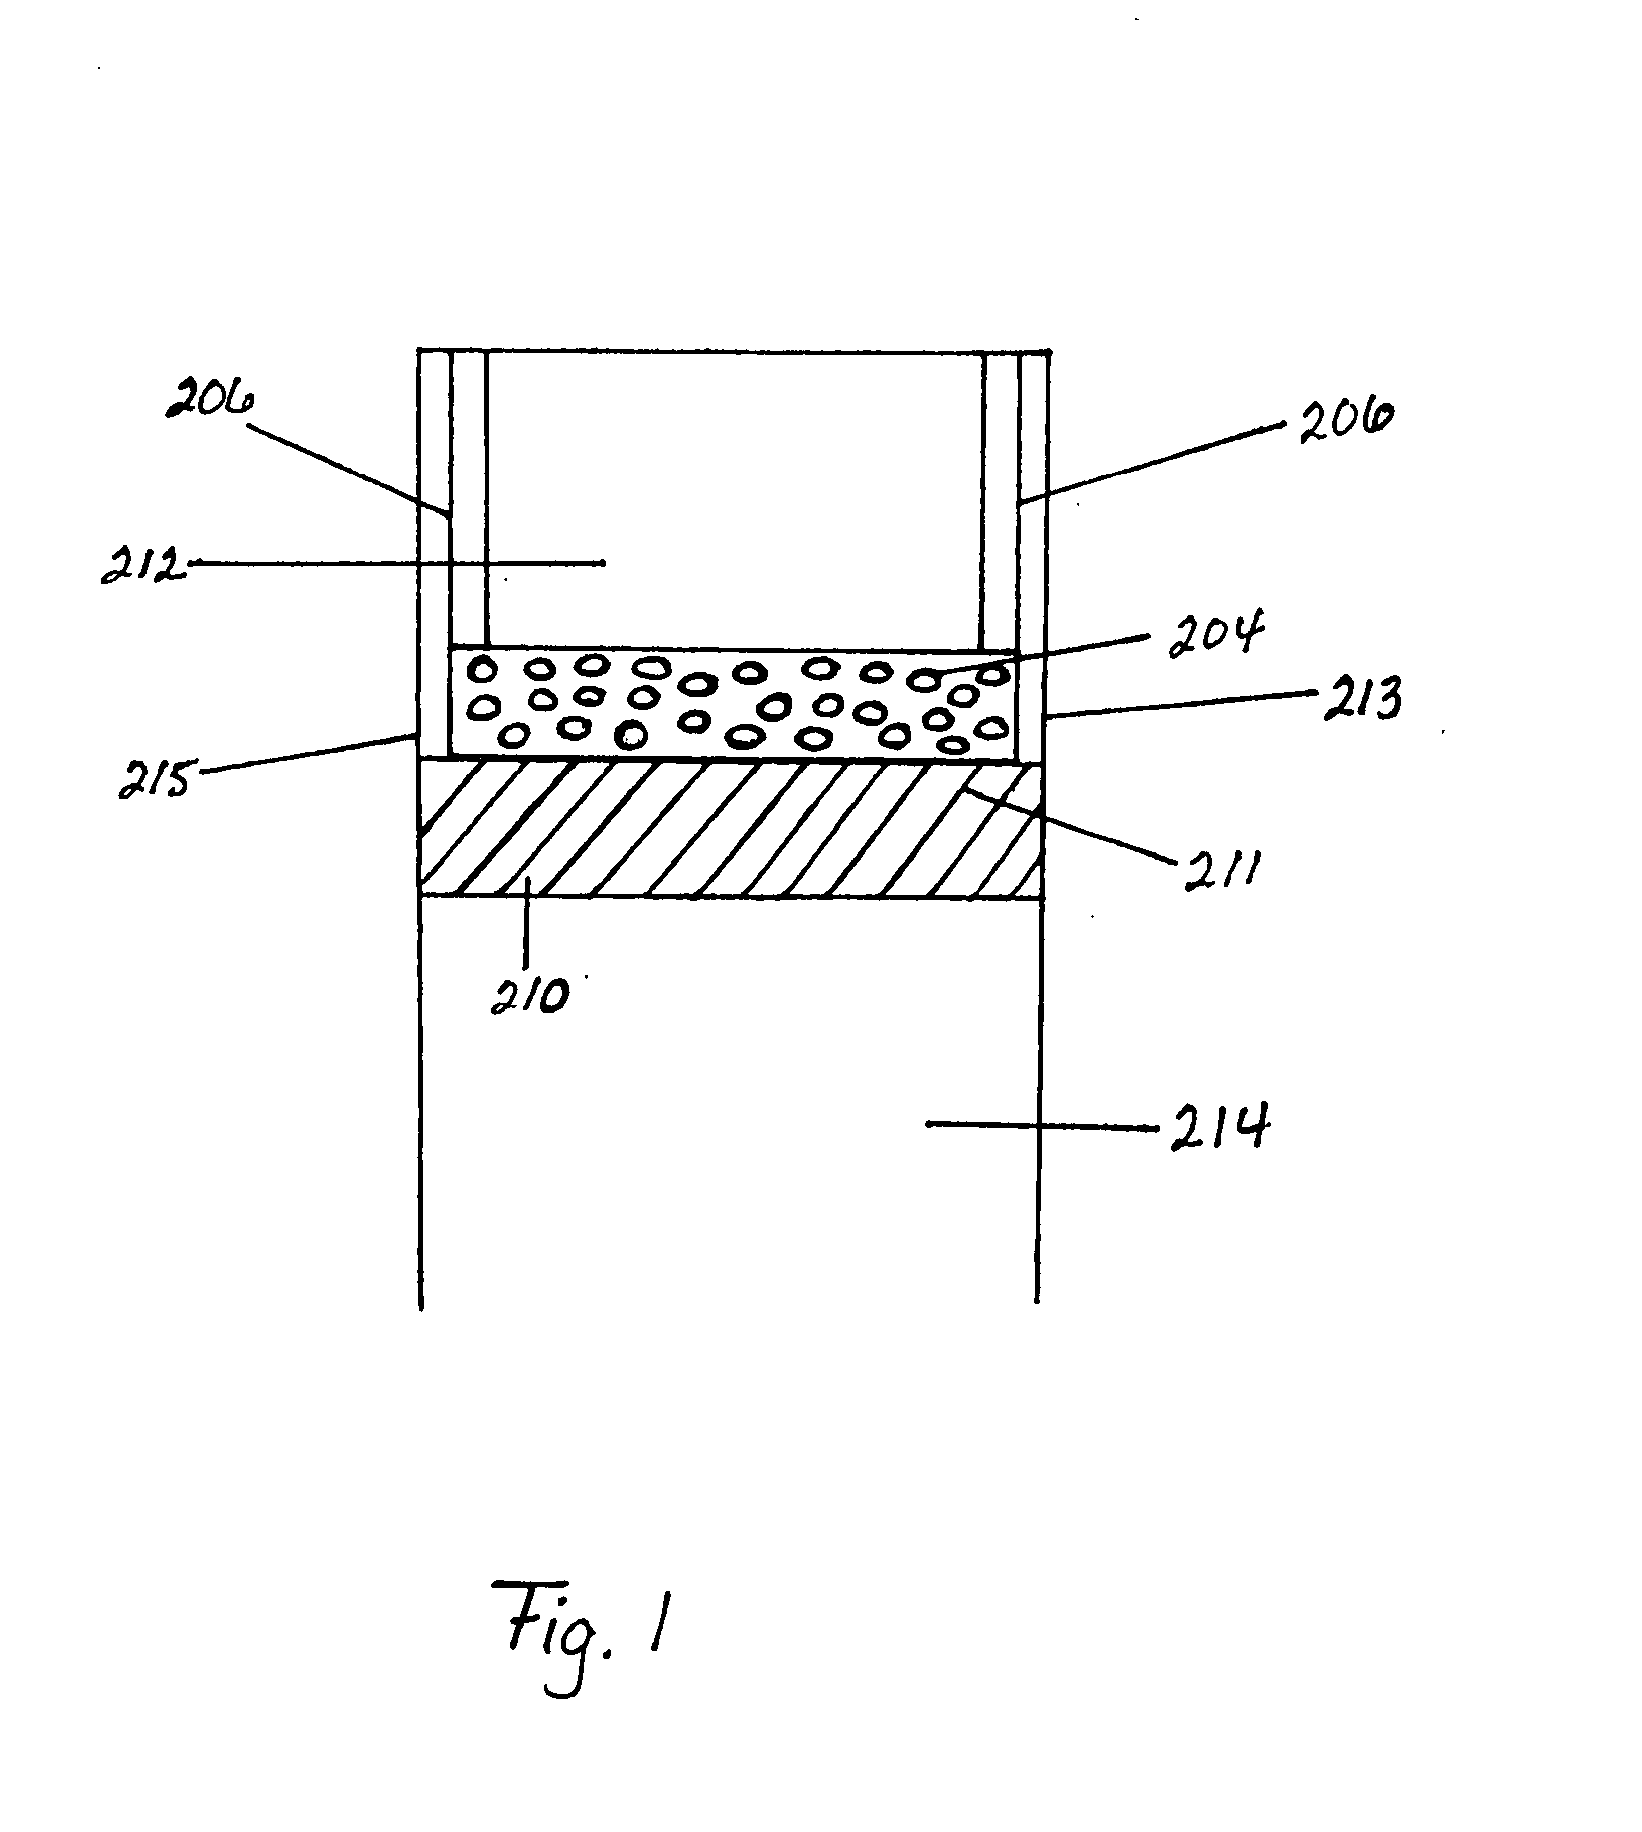 Integrated Combustion Reactor And Methods Of Conducting Simultaneous Endothermic and Exothermic Reactions